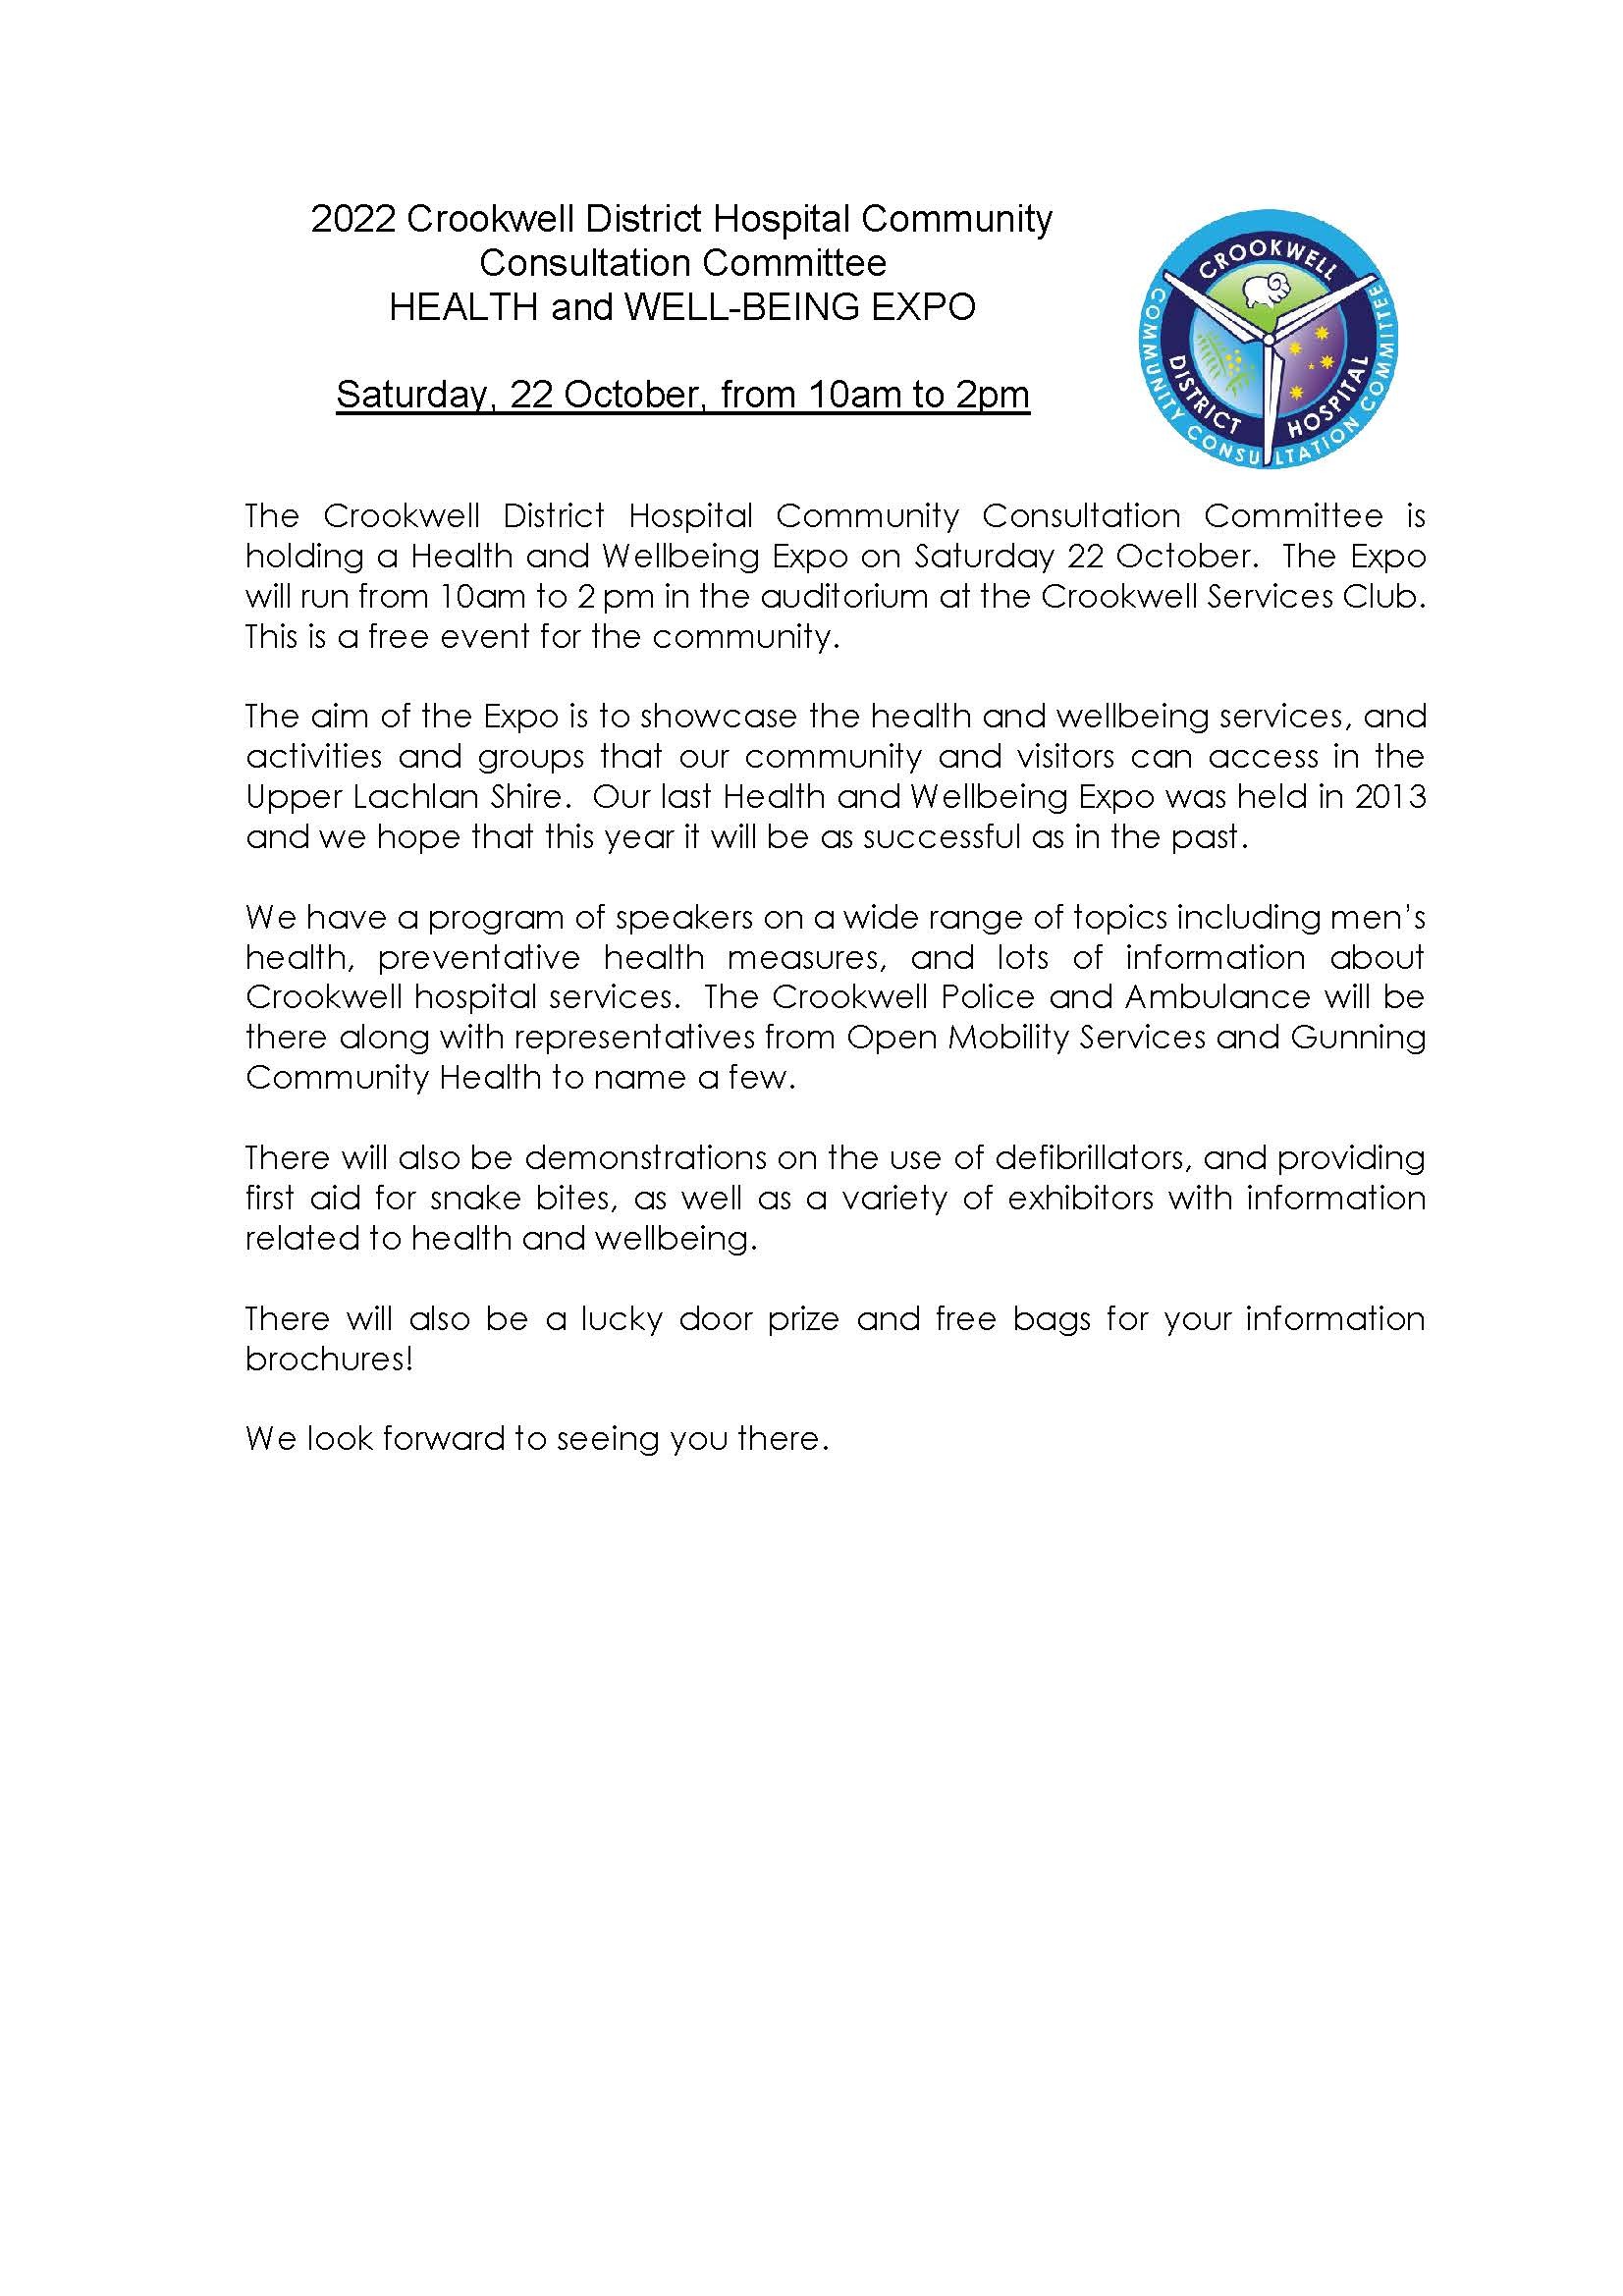 CCC General letter for Health and Wellbeing Expo 22 October 2022